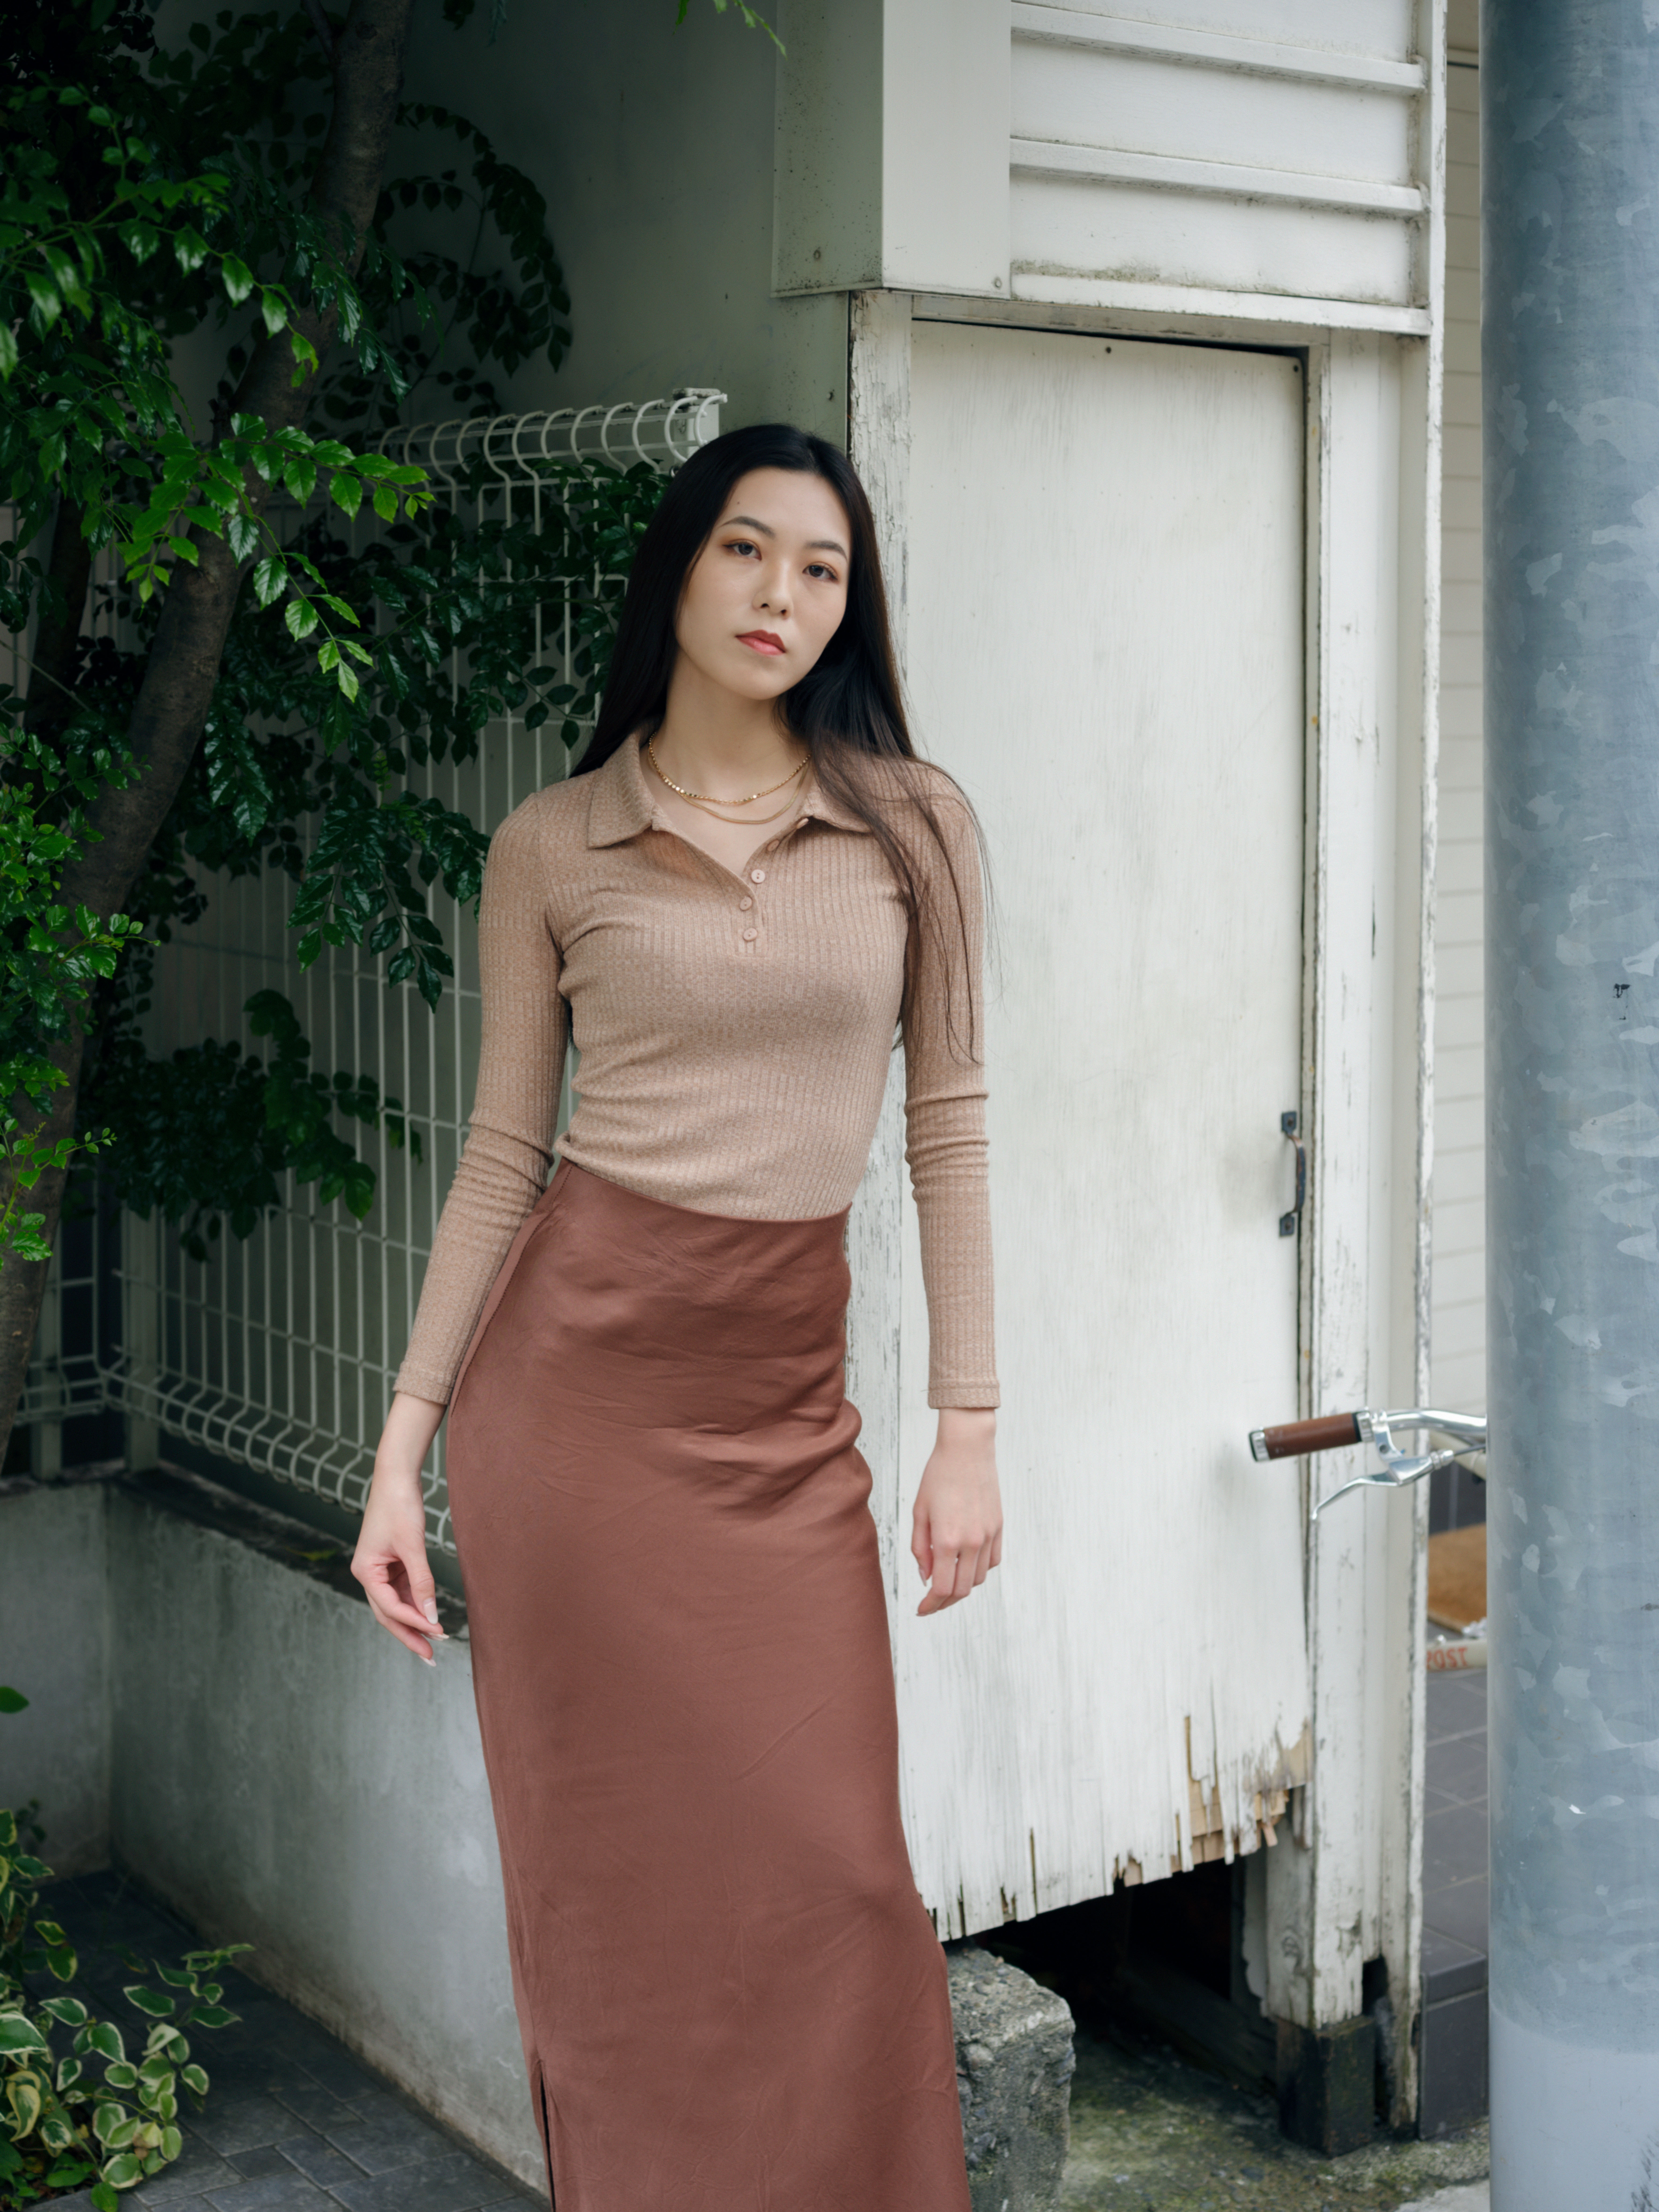 a woman with long straight hair wears a long brown skirt and a beige knit shirt with two gold chains.  she stands on a side street